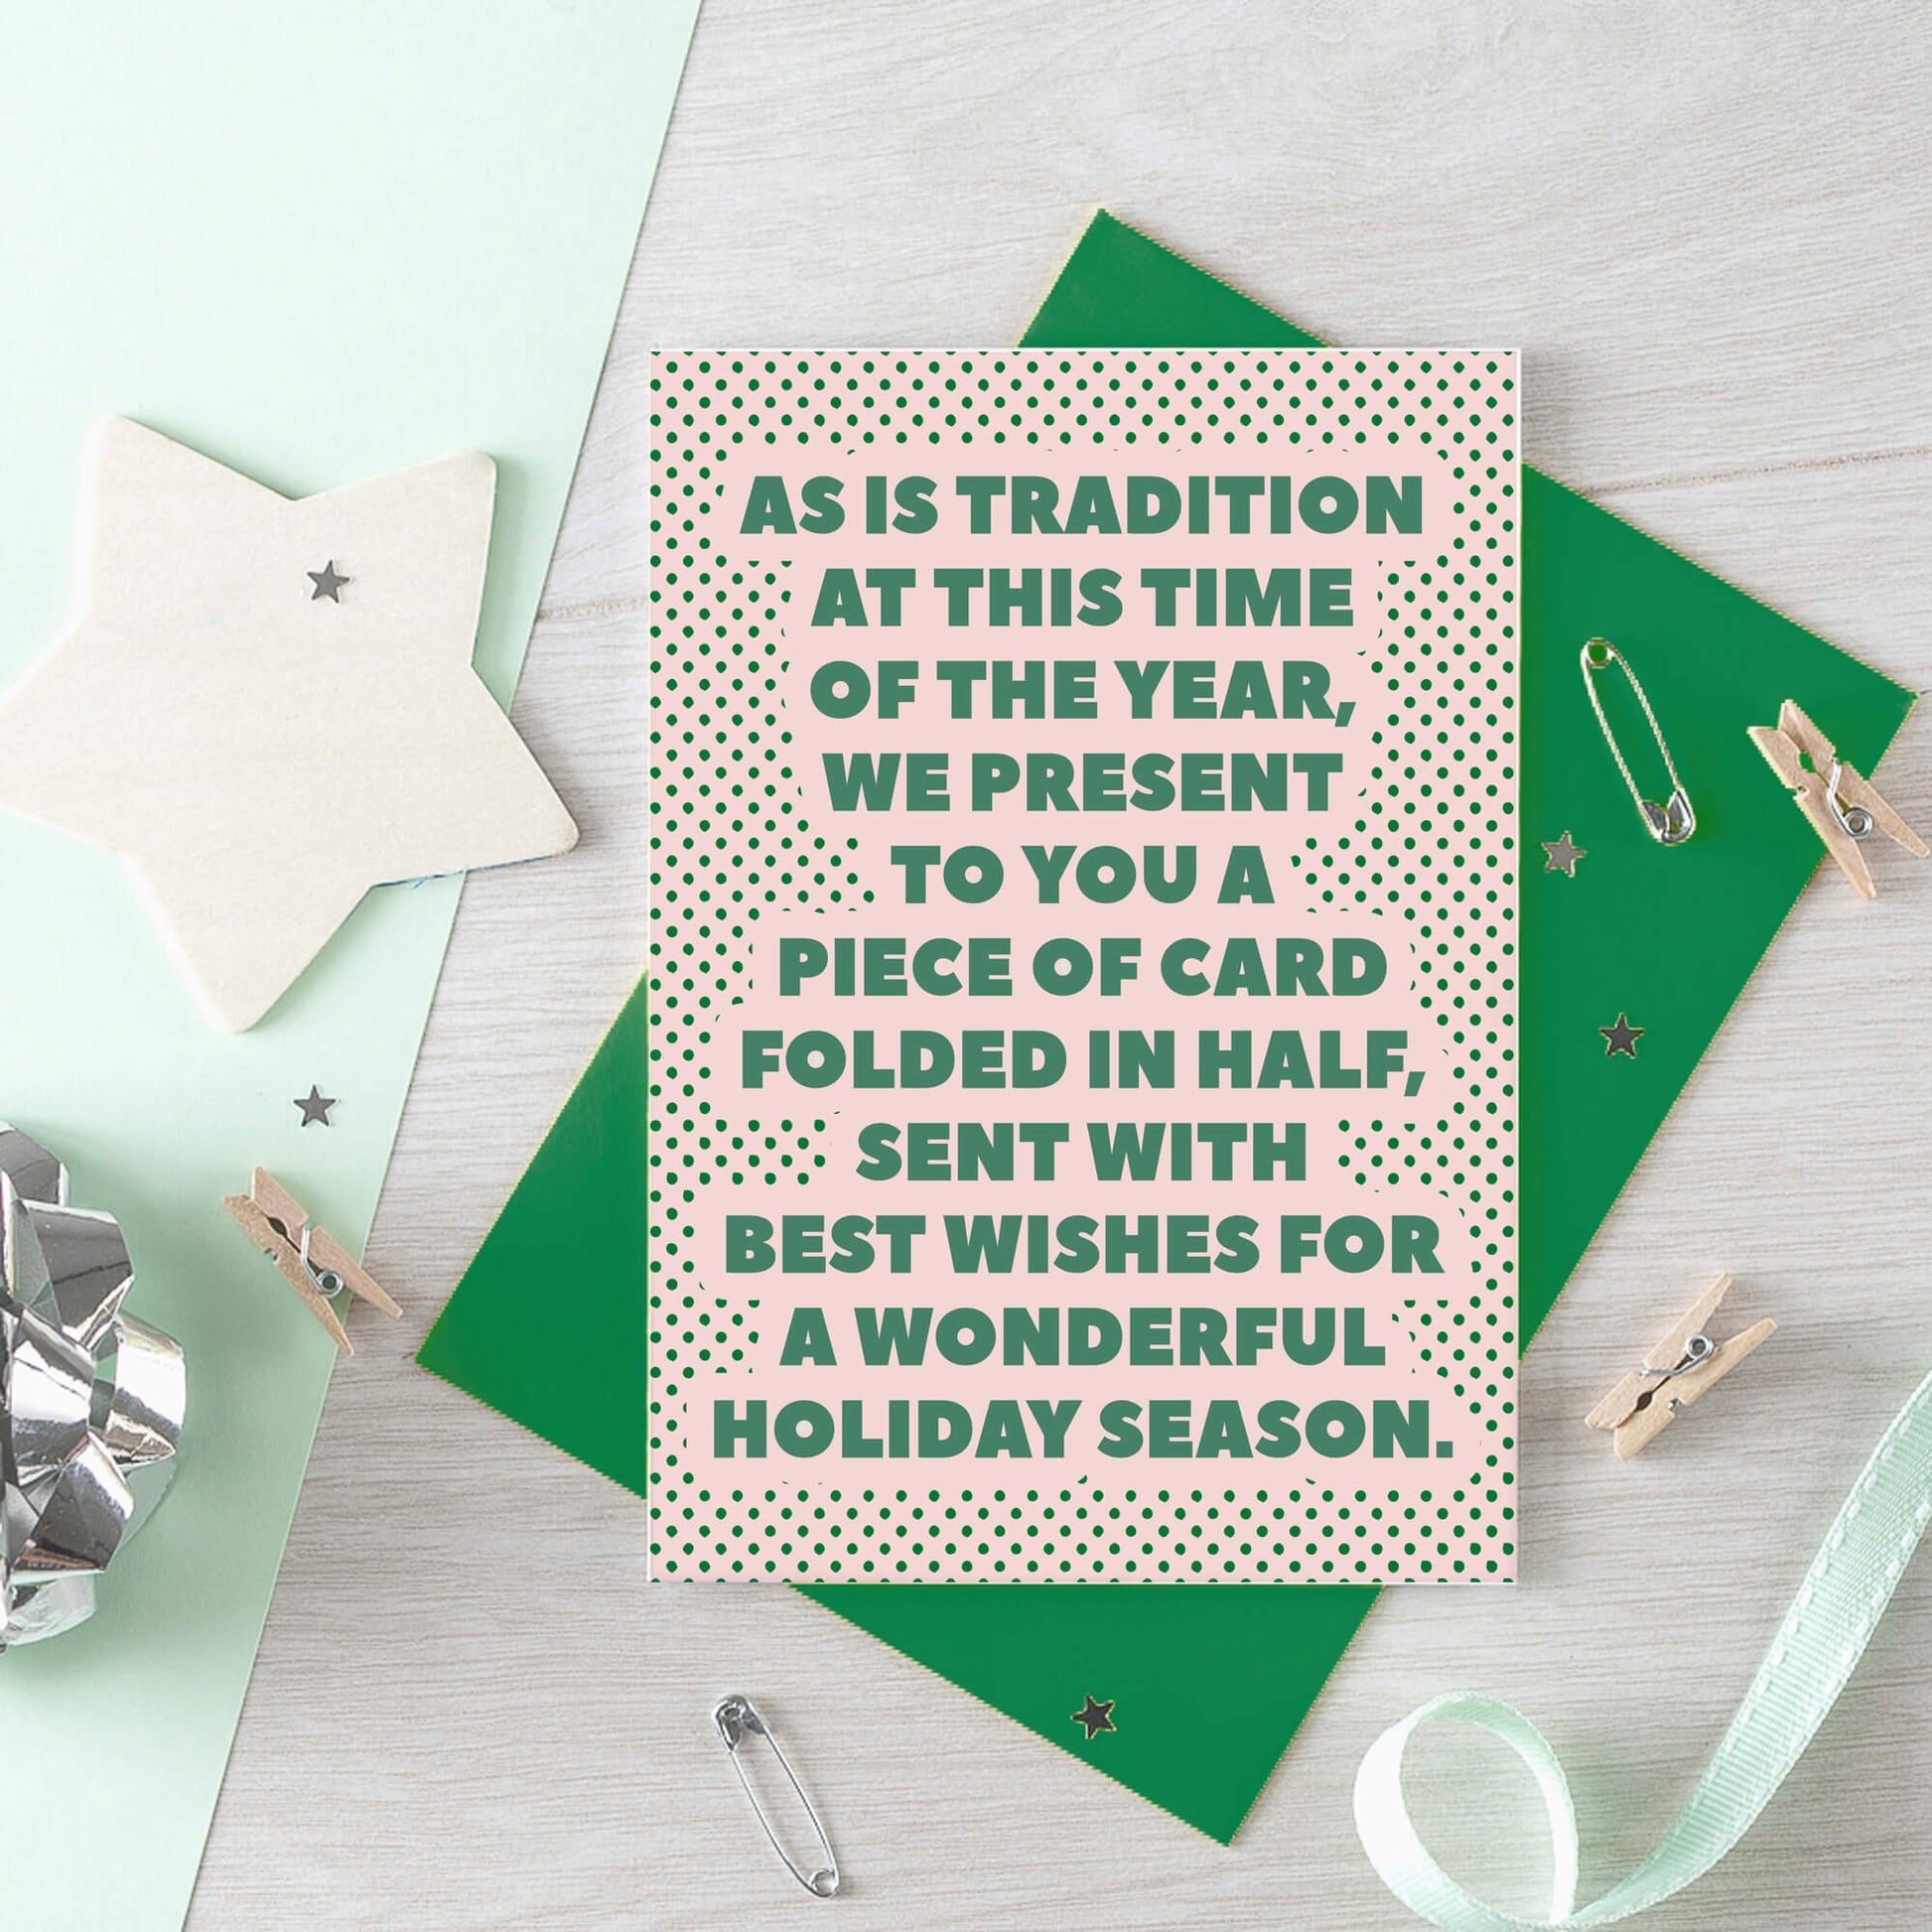 Christmas Card by SixElevenCreations. Reads As is tradition at this time of the year, we present to you a piece of card folded in half, sent with best wishes for a wonderful holiday season. Product Code SEC0075A6